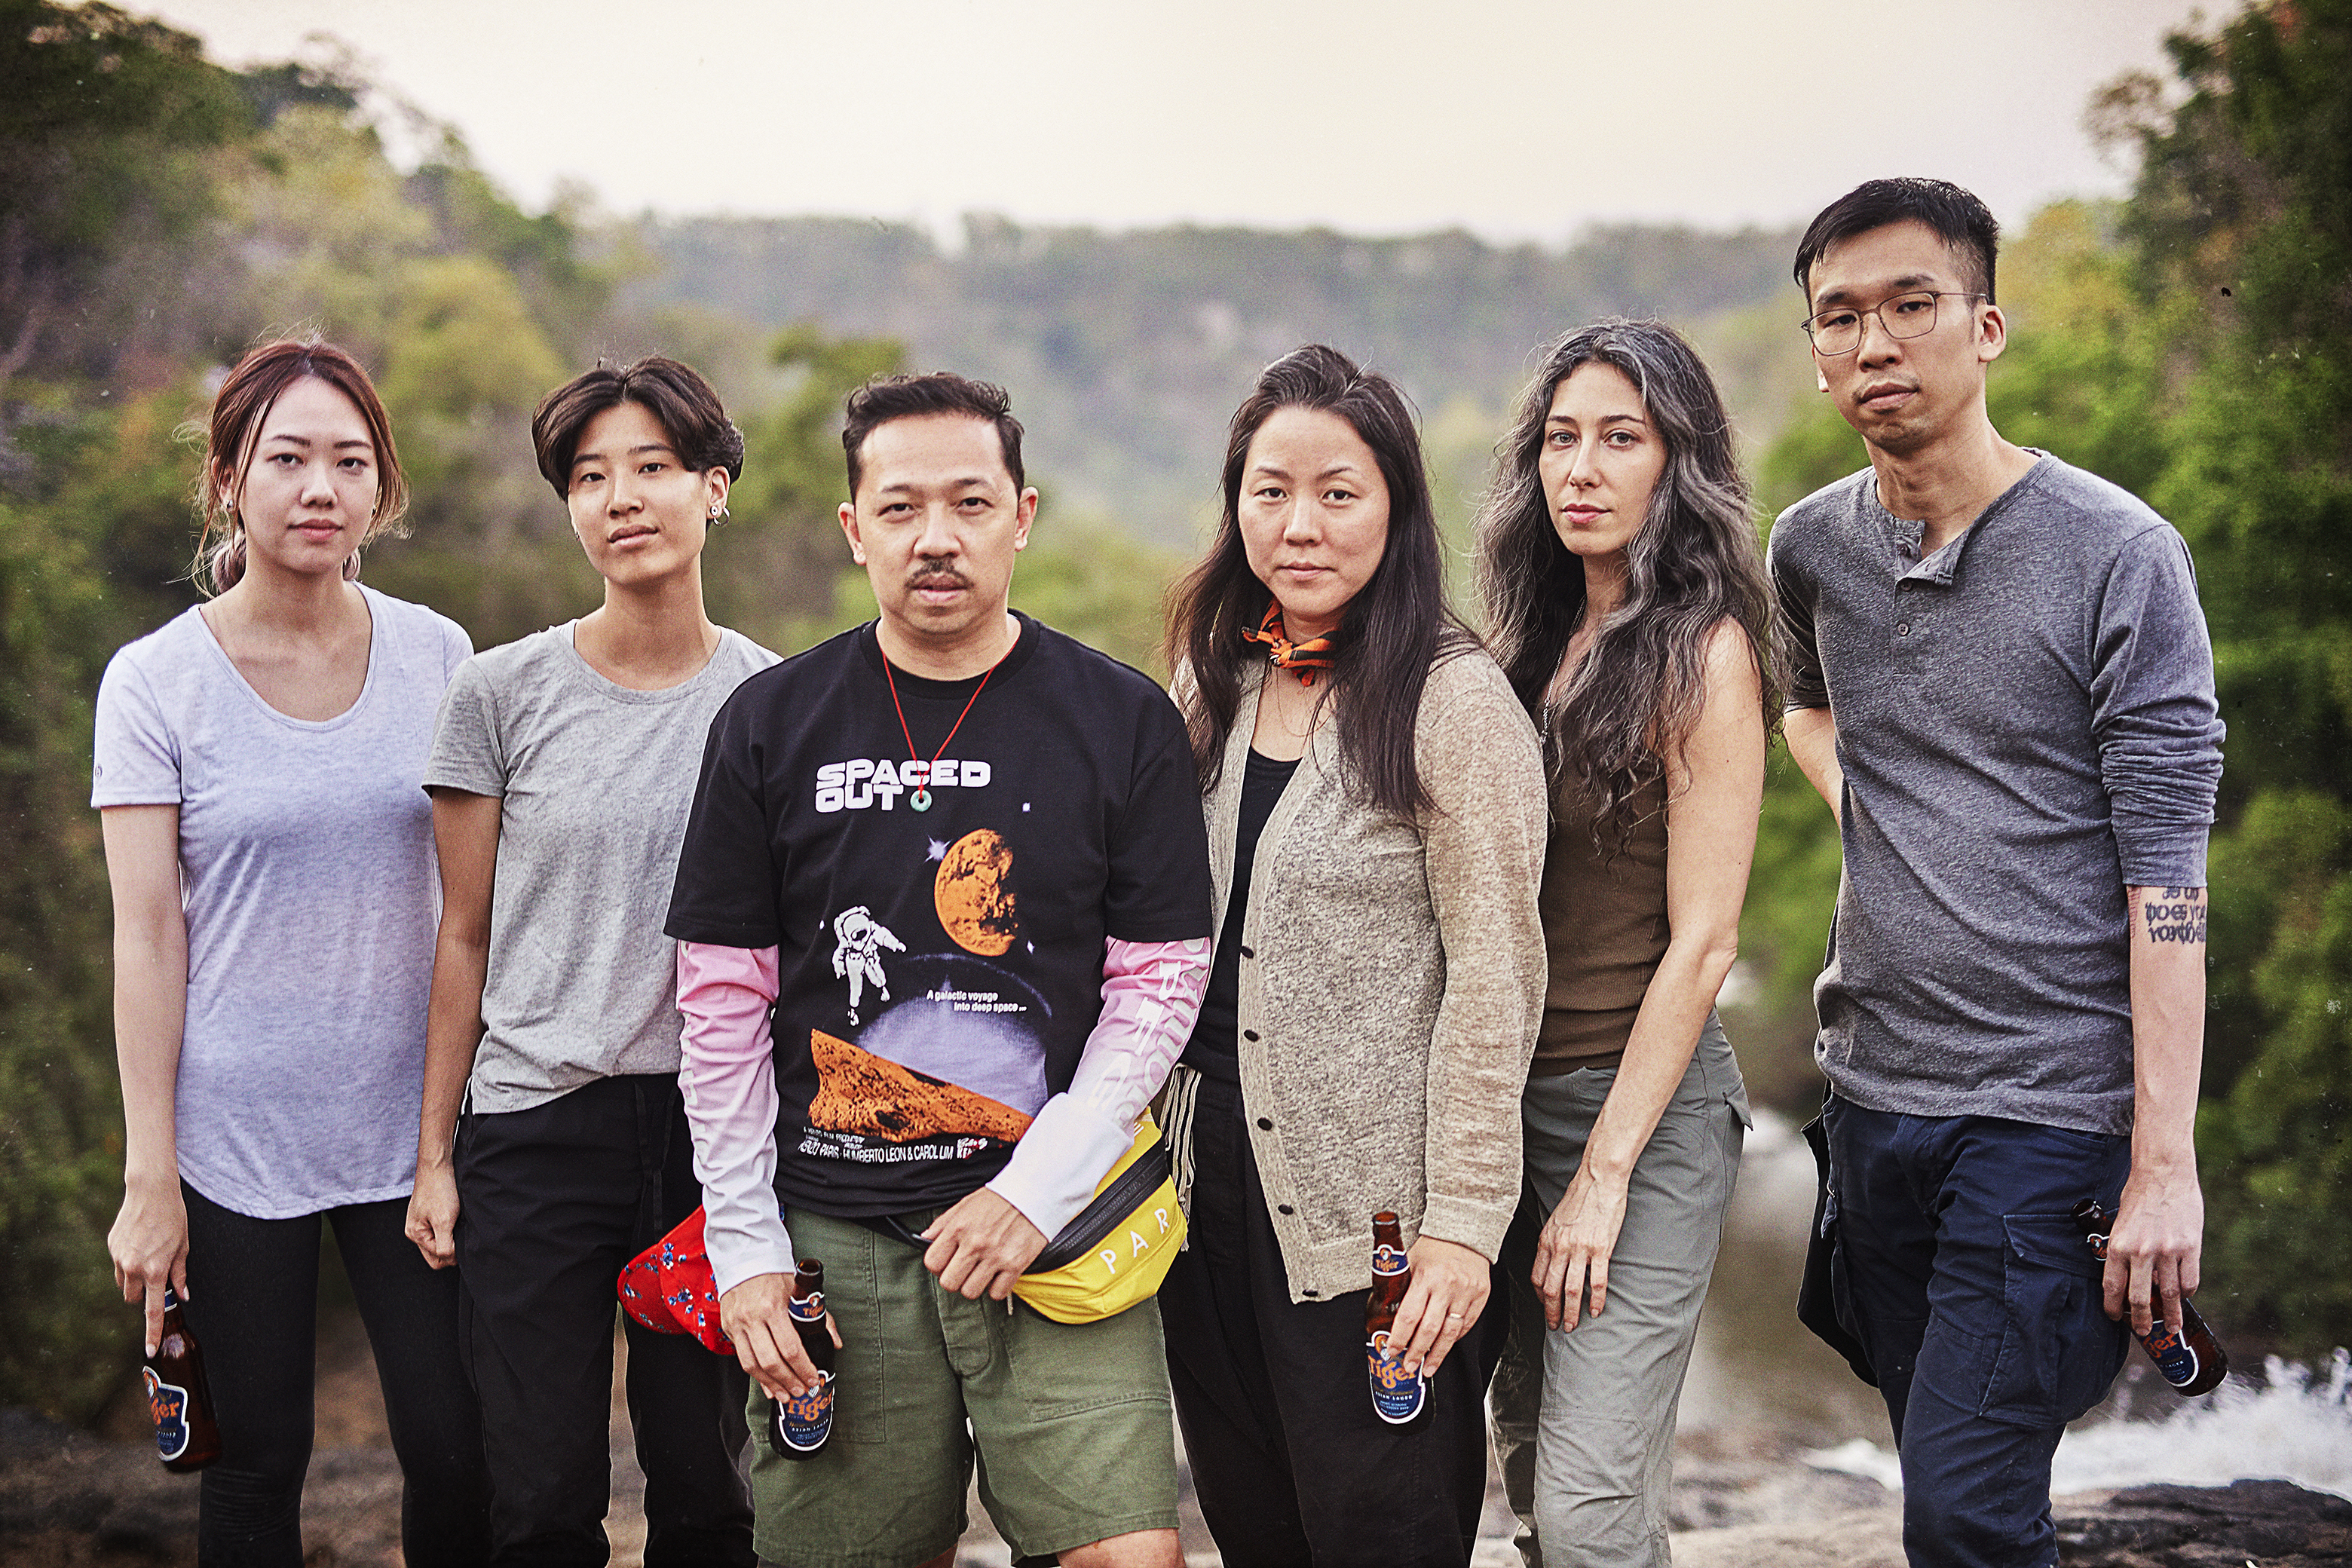 From left to right, Esther Goh (SG), Julienne Tan (KH), Humberto Leon and Carol Lim, Meryl Smith (US) and Sean Lean (MY)